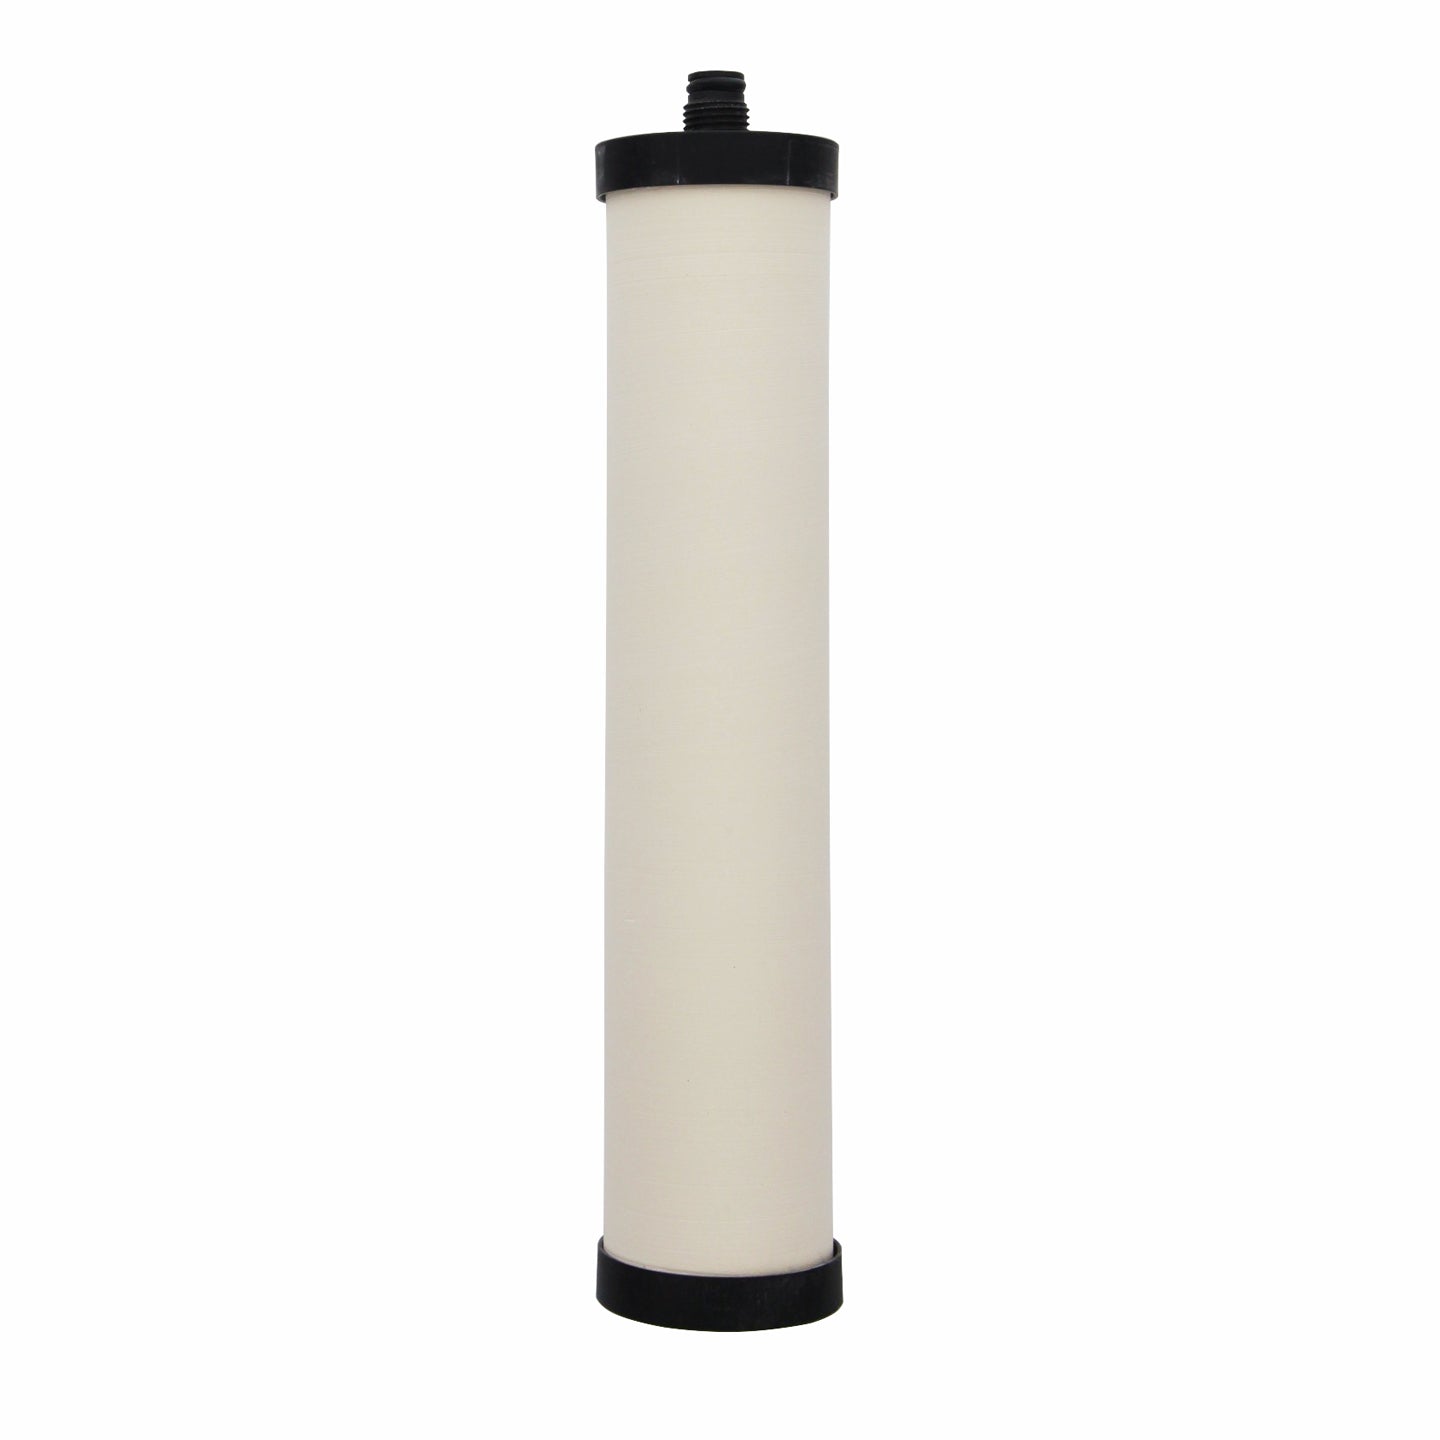 W9223021 Doulton Ceramic Water Filter (front)